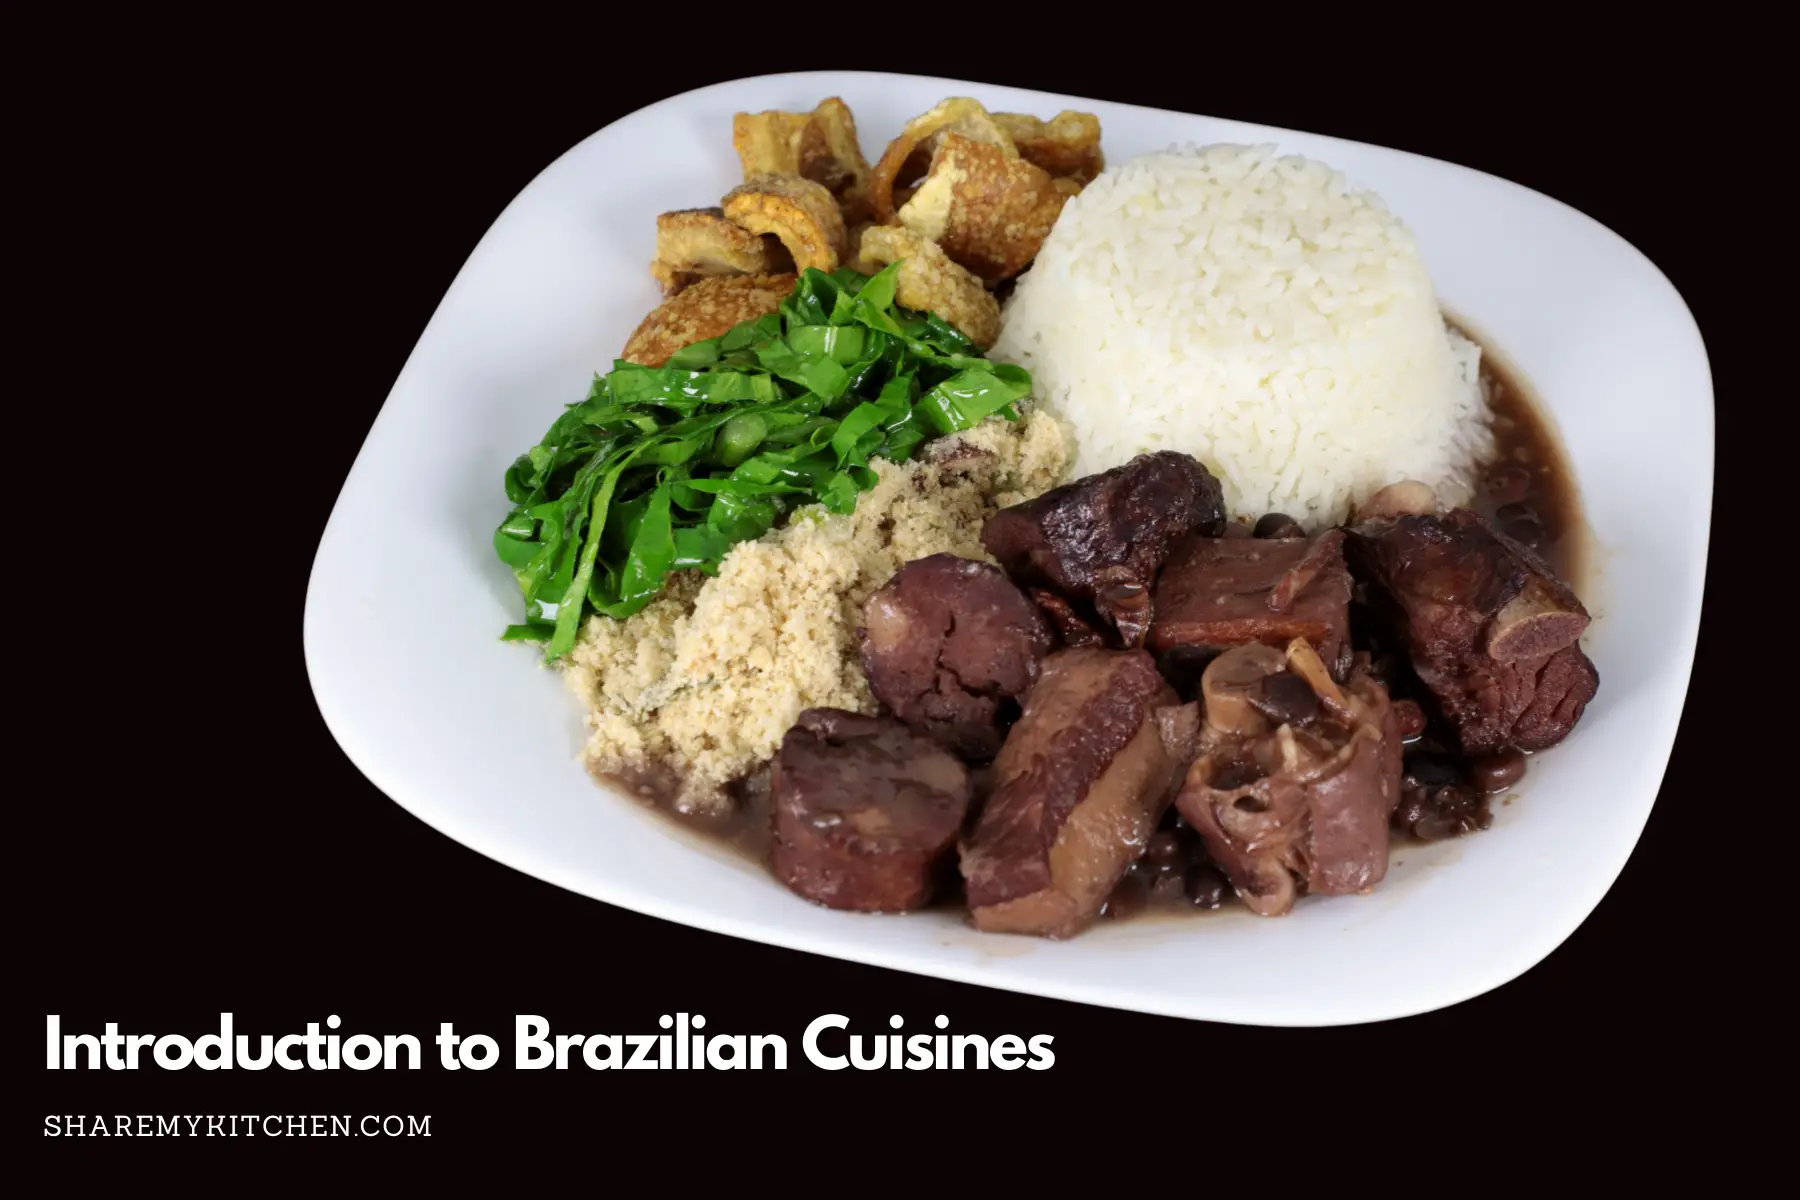 Introduction to Brazilian Cuisines